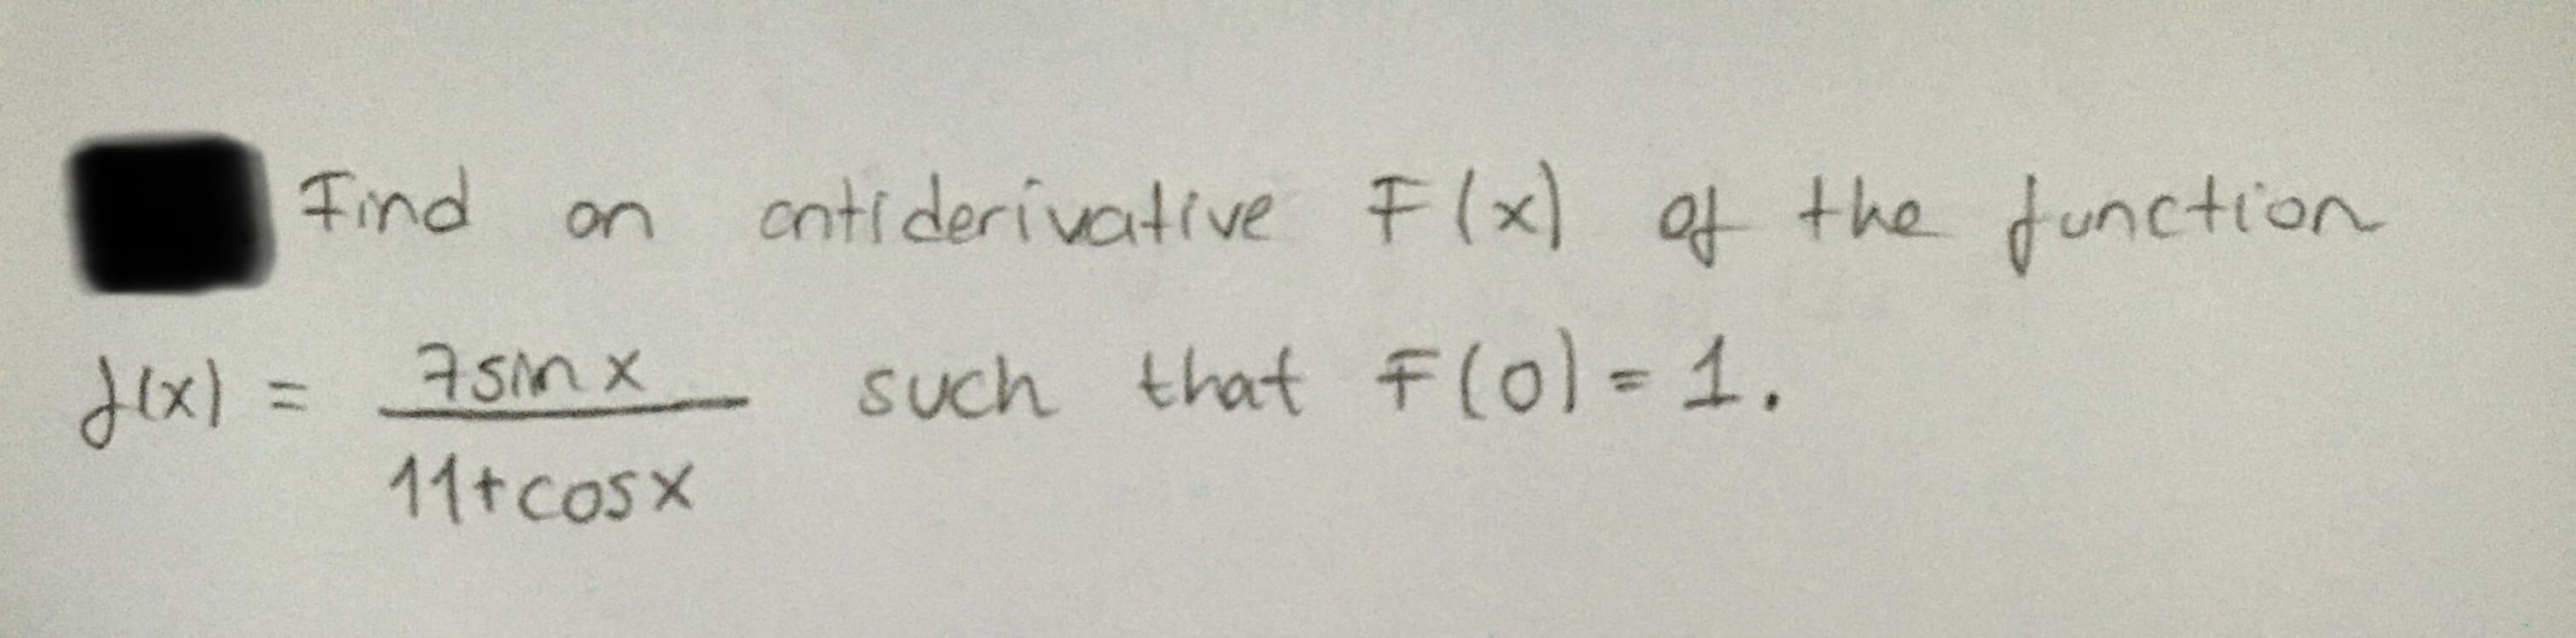 ontiderivative t(x) the function
+ to
such that F(0)=1.
on
(x) 3D
7sinx
%3D
11tcosx
